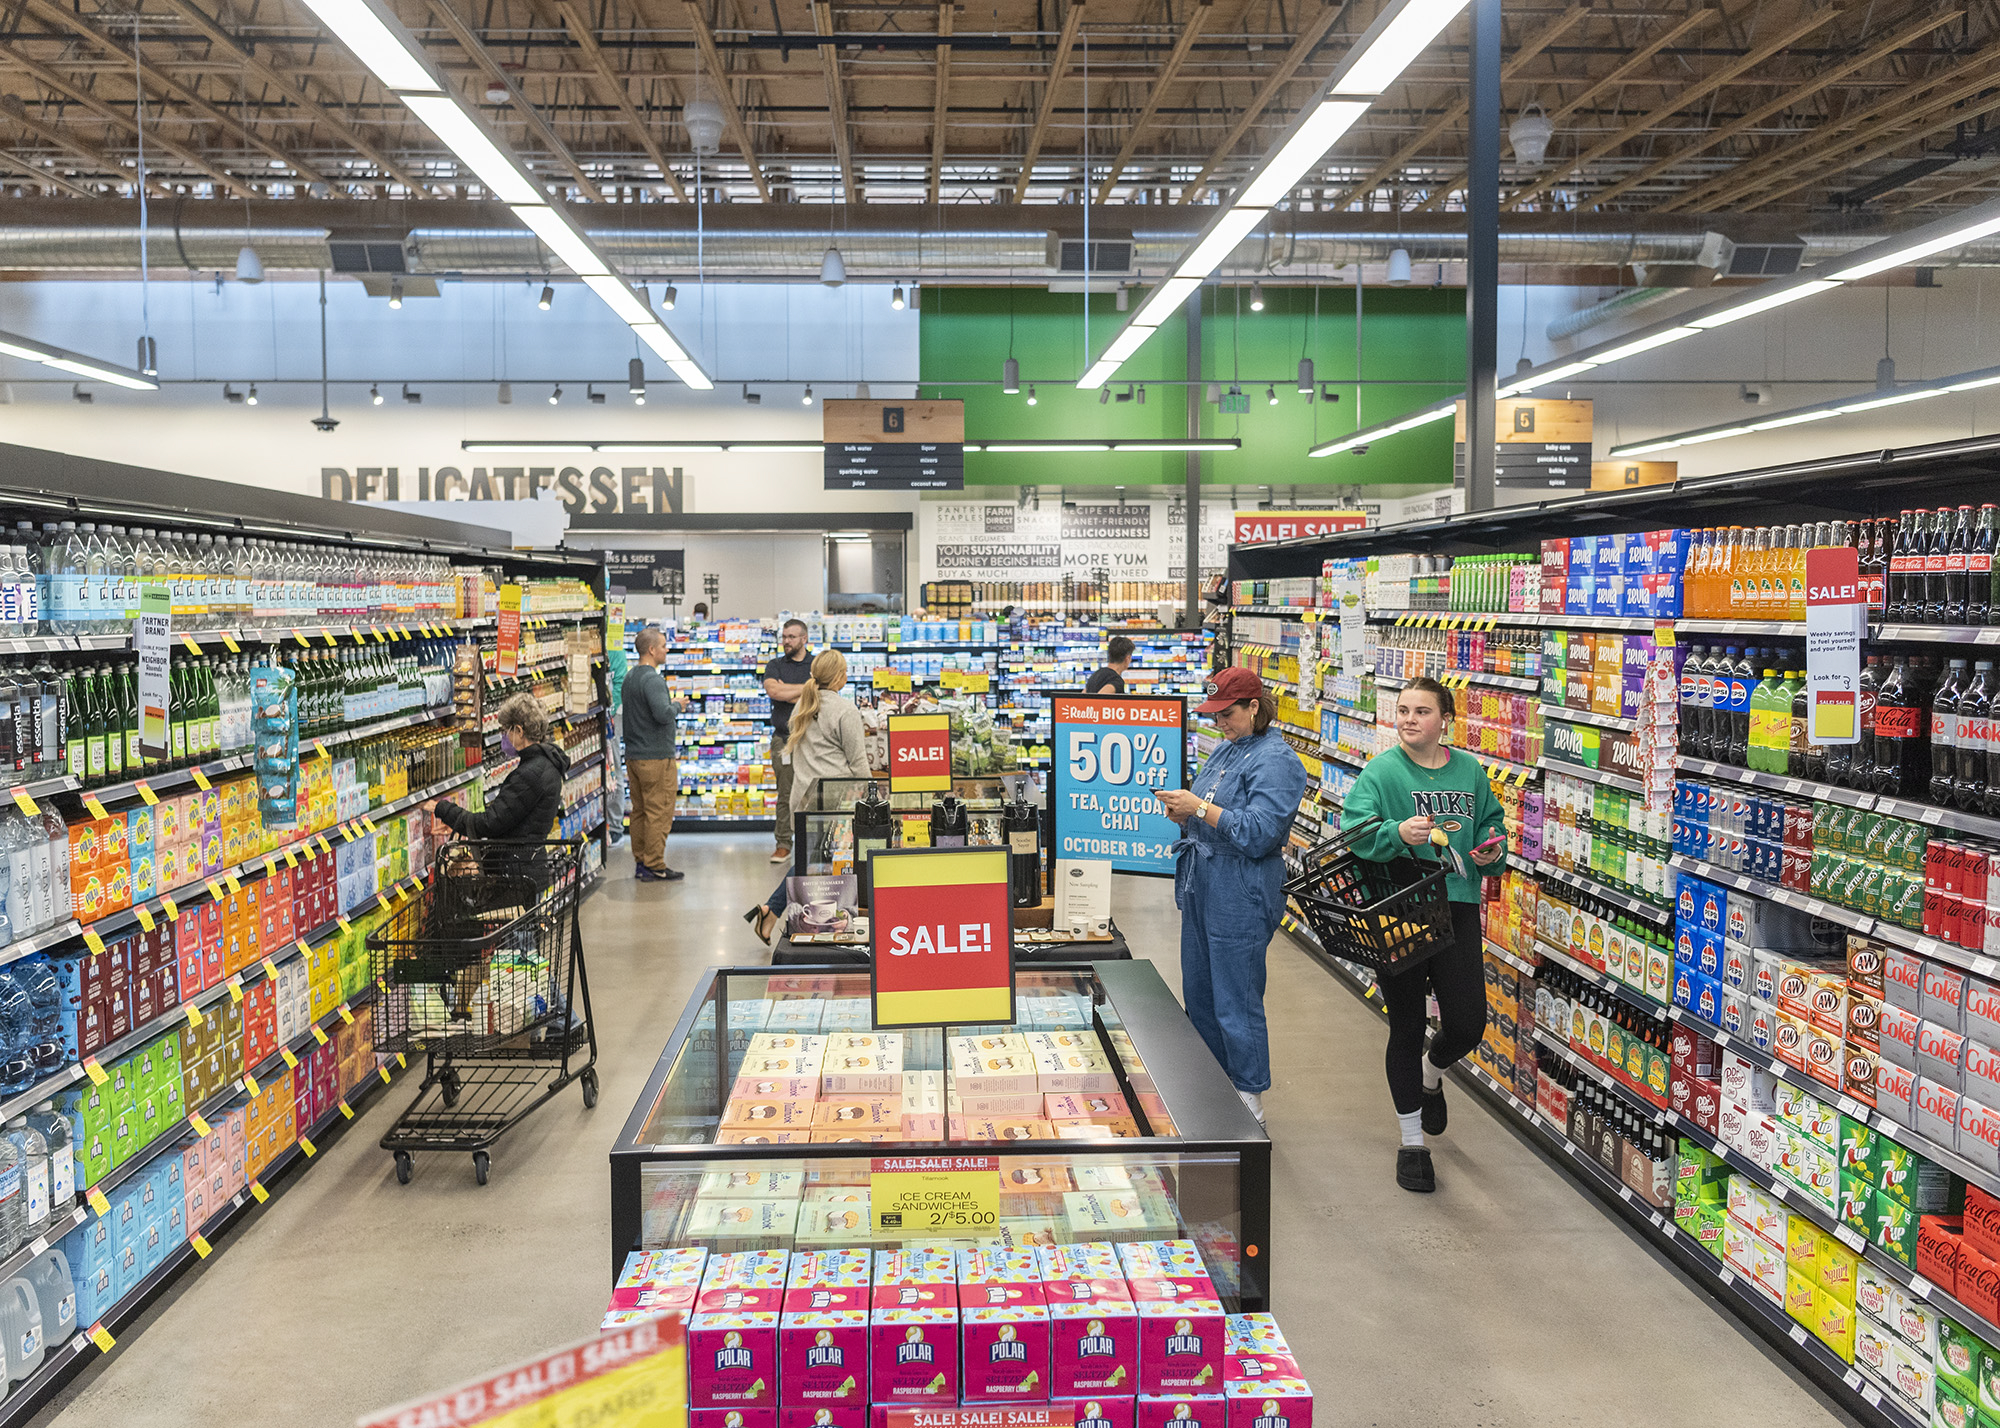 Shoppers browse the shelves Wednesday at the grand opening of the downtown New Seasons.